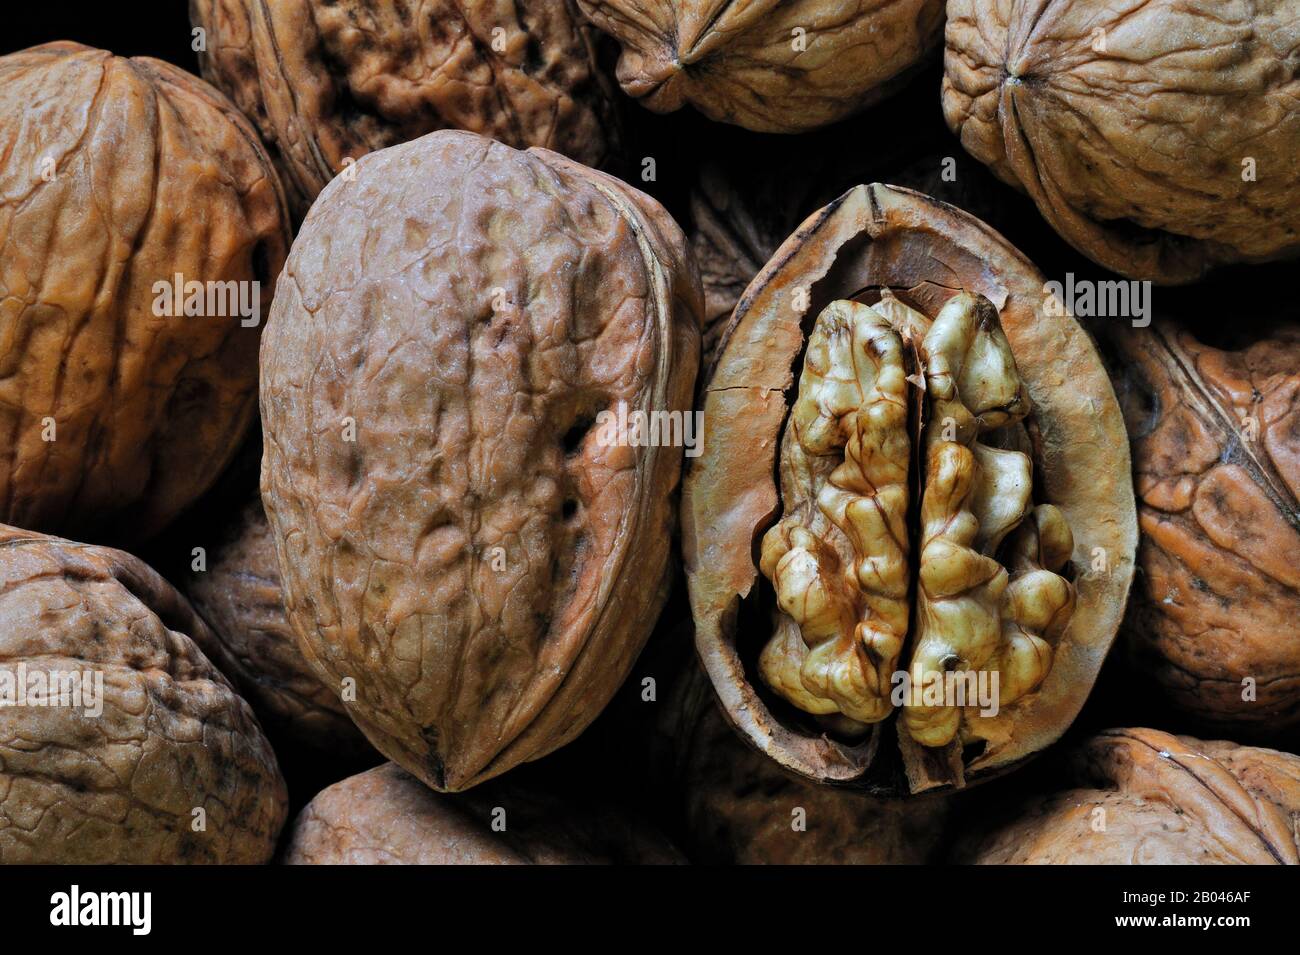 Common walnuts / Persian walnut / English walnuts (Juglans regia) native to Southern Europe and Asia harvested in autumn Stock Photo